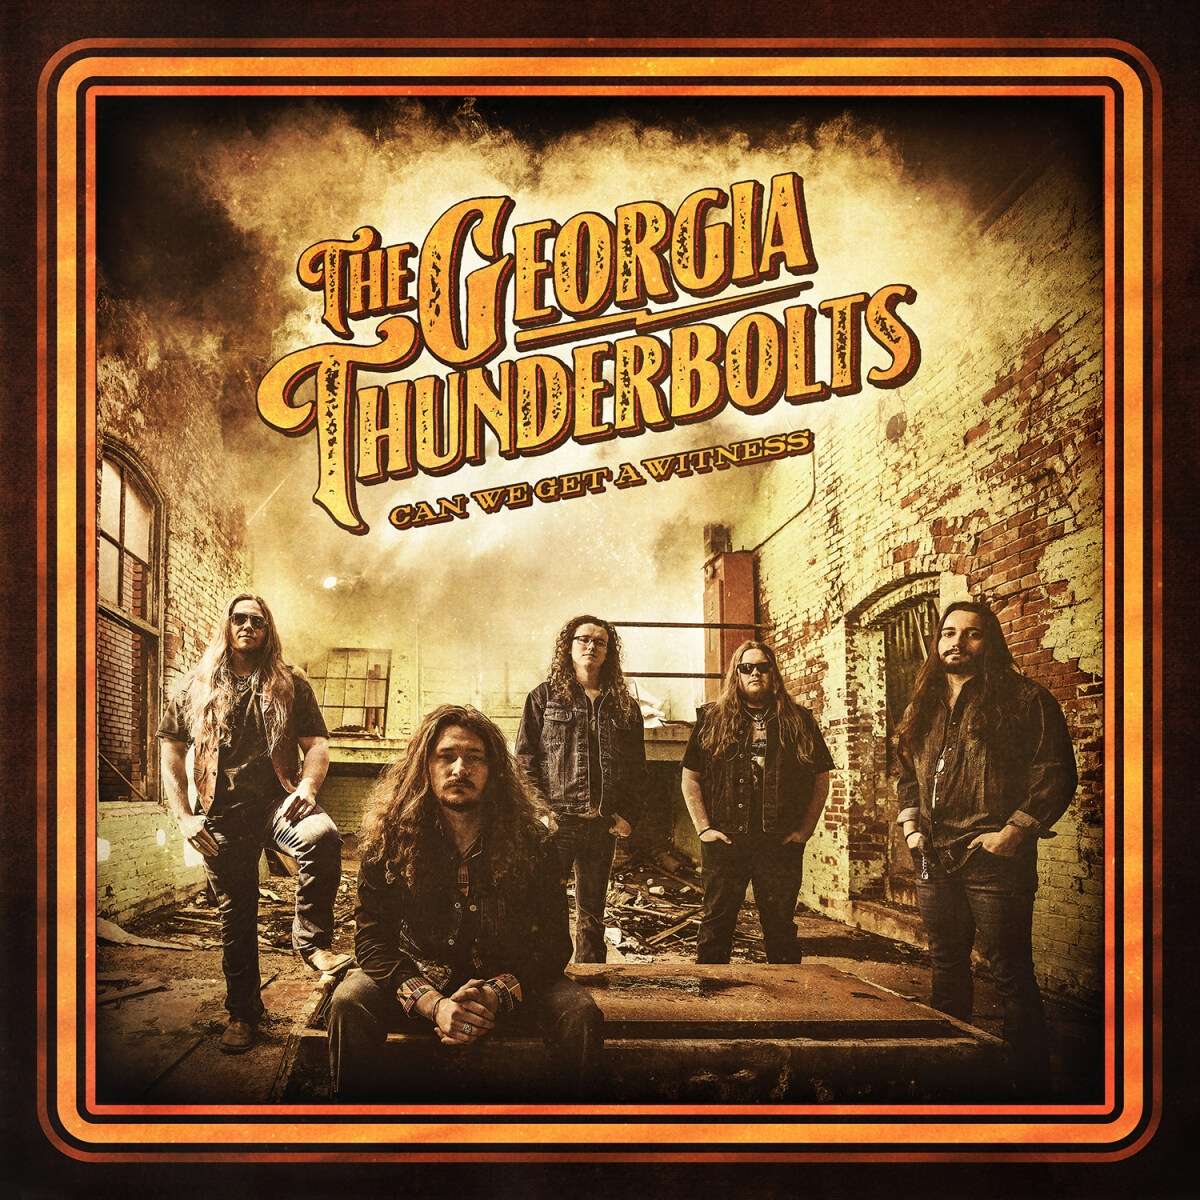 The Georgia Thunderbolds - Can We Get A Witness